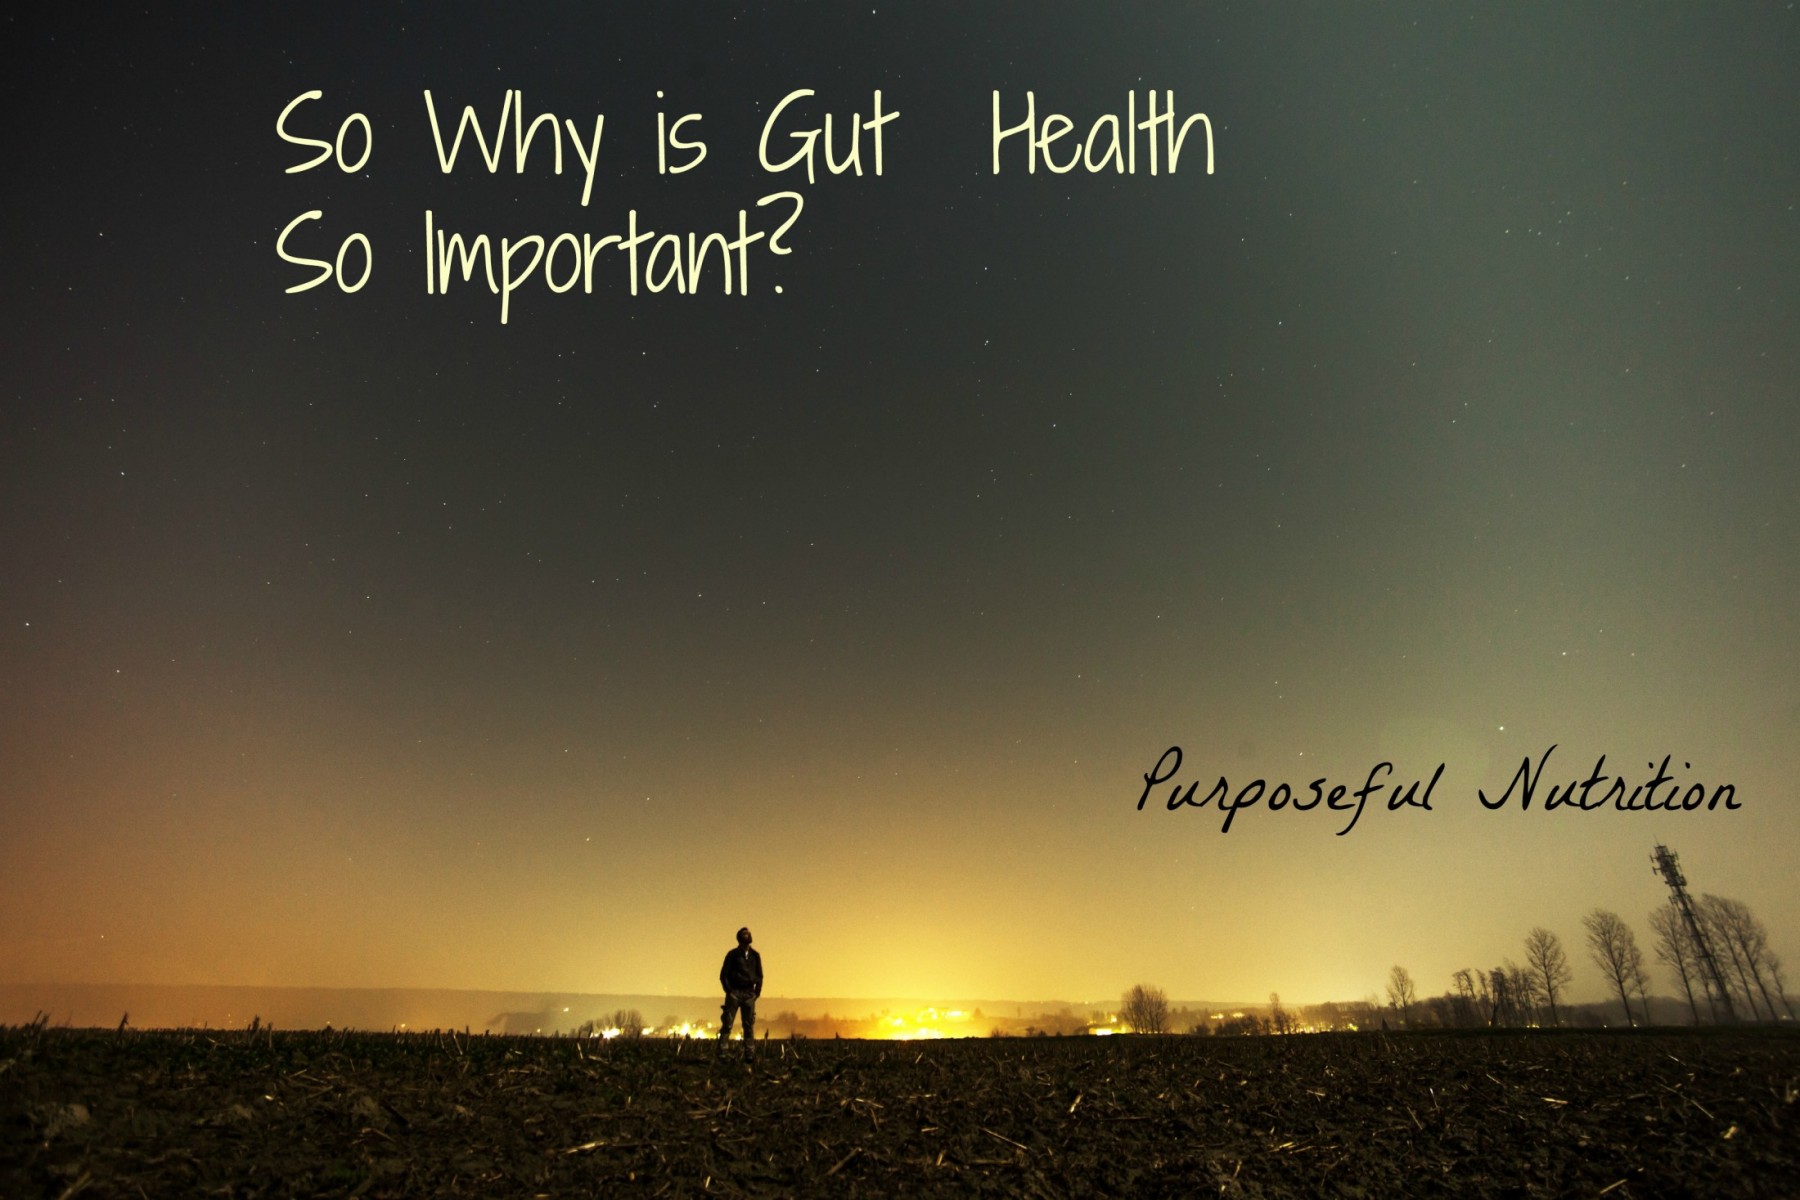 So Why is Gut Health So Important? Purposeful Nutrition